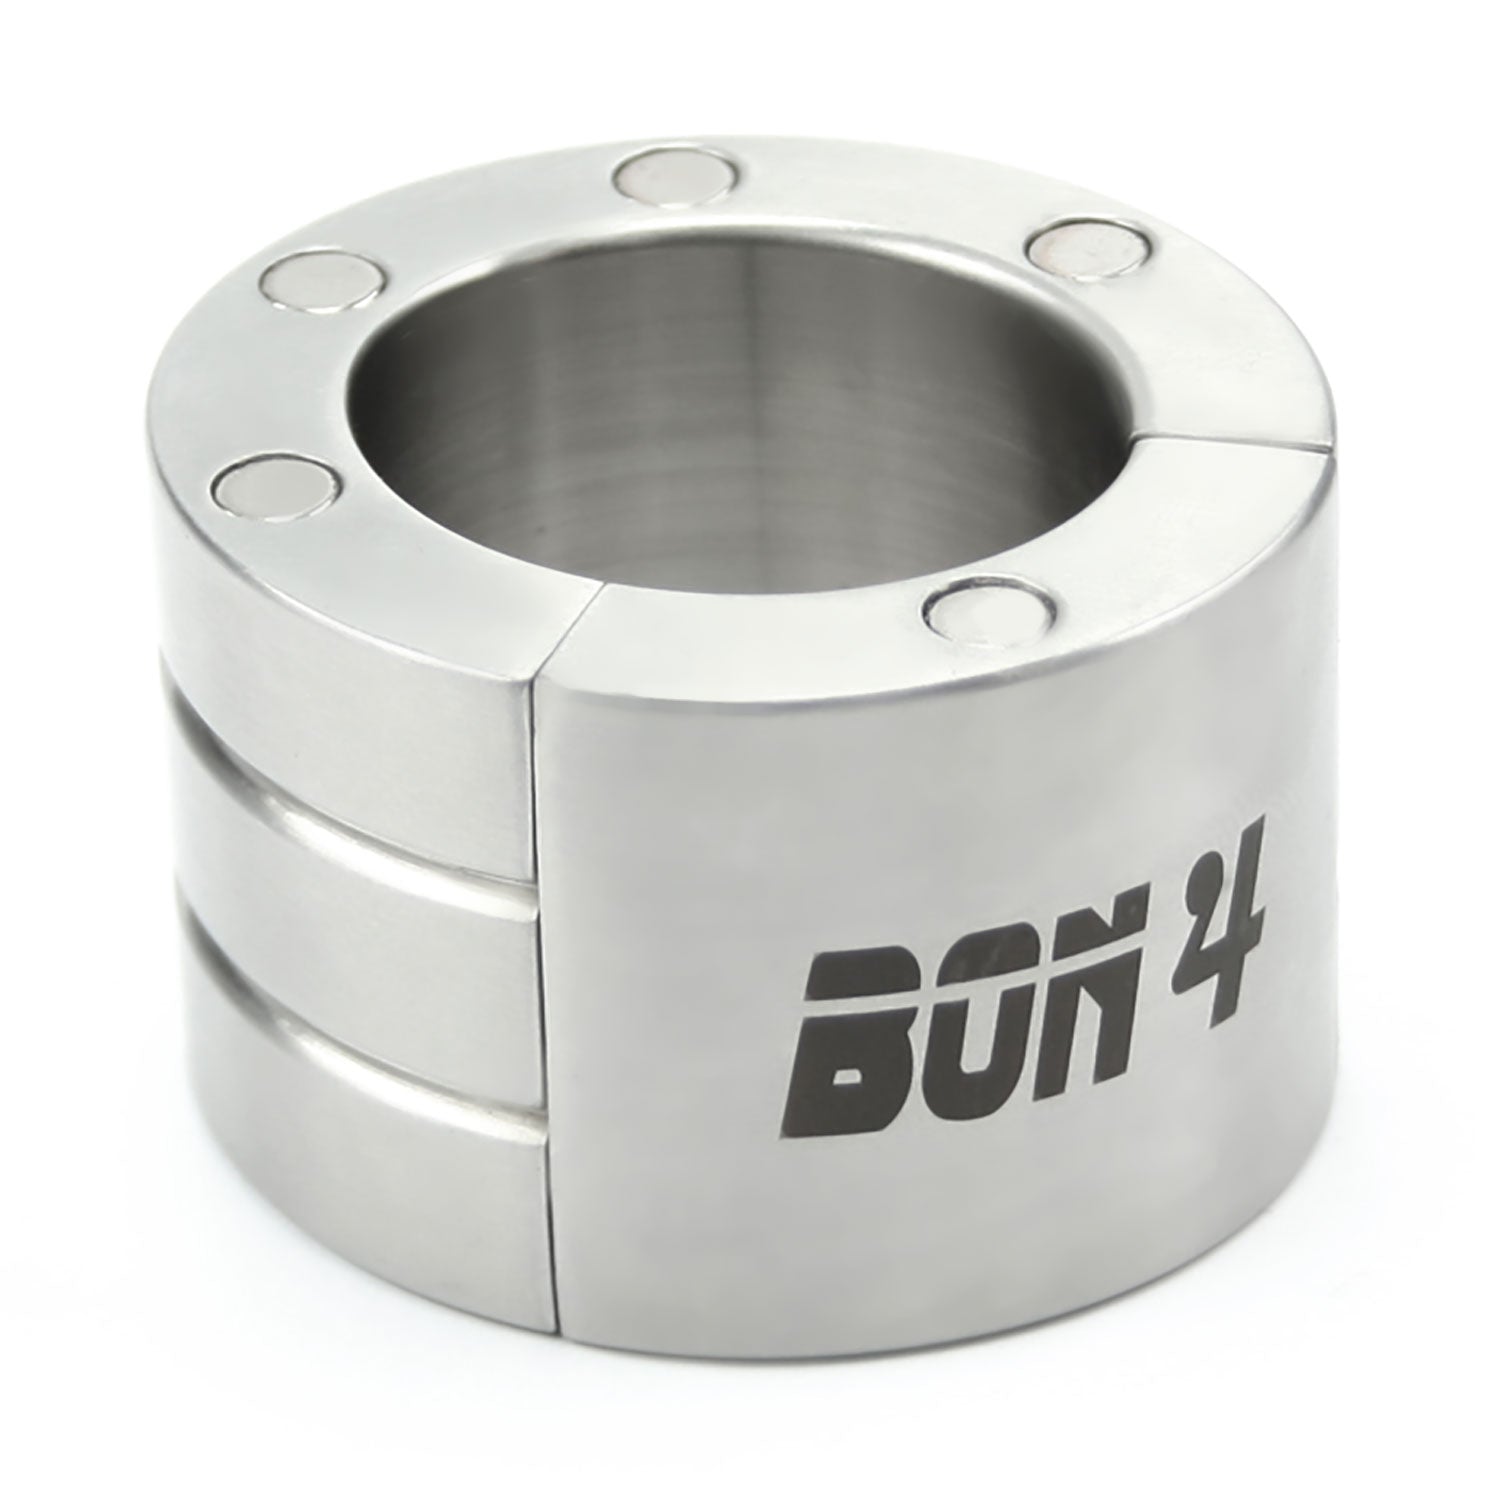 Bon4 Magnetic Ball Stretcher in Steel 36 mm 